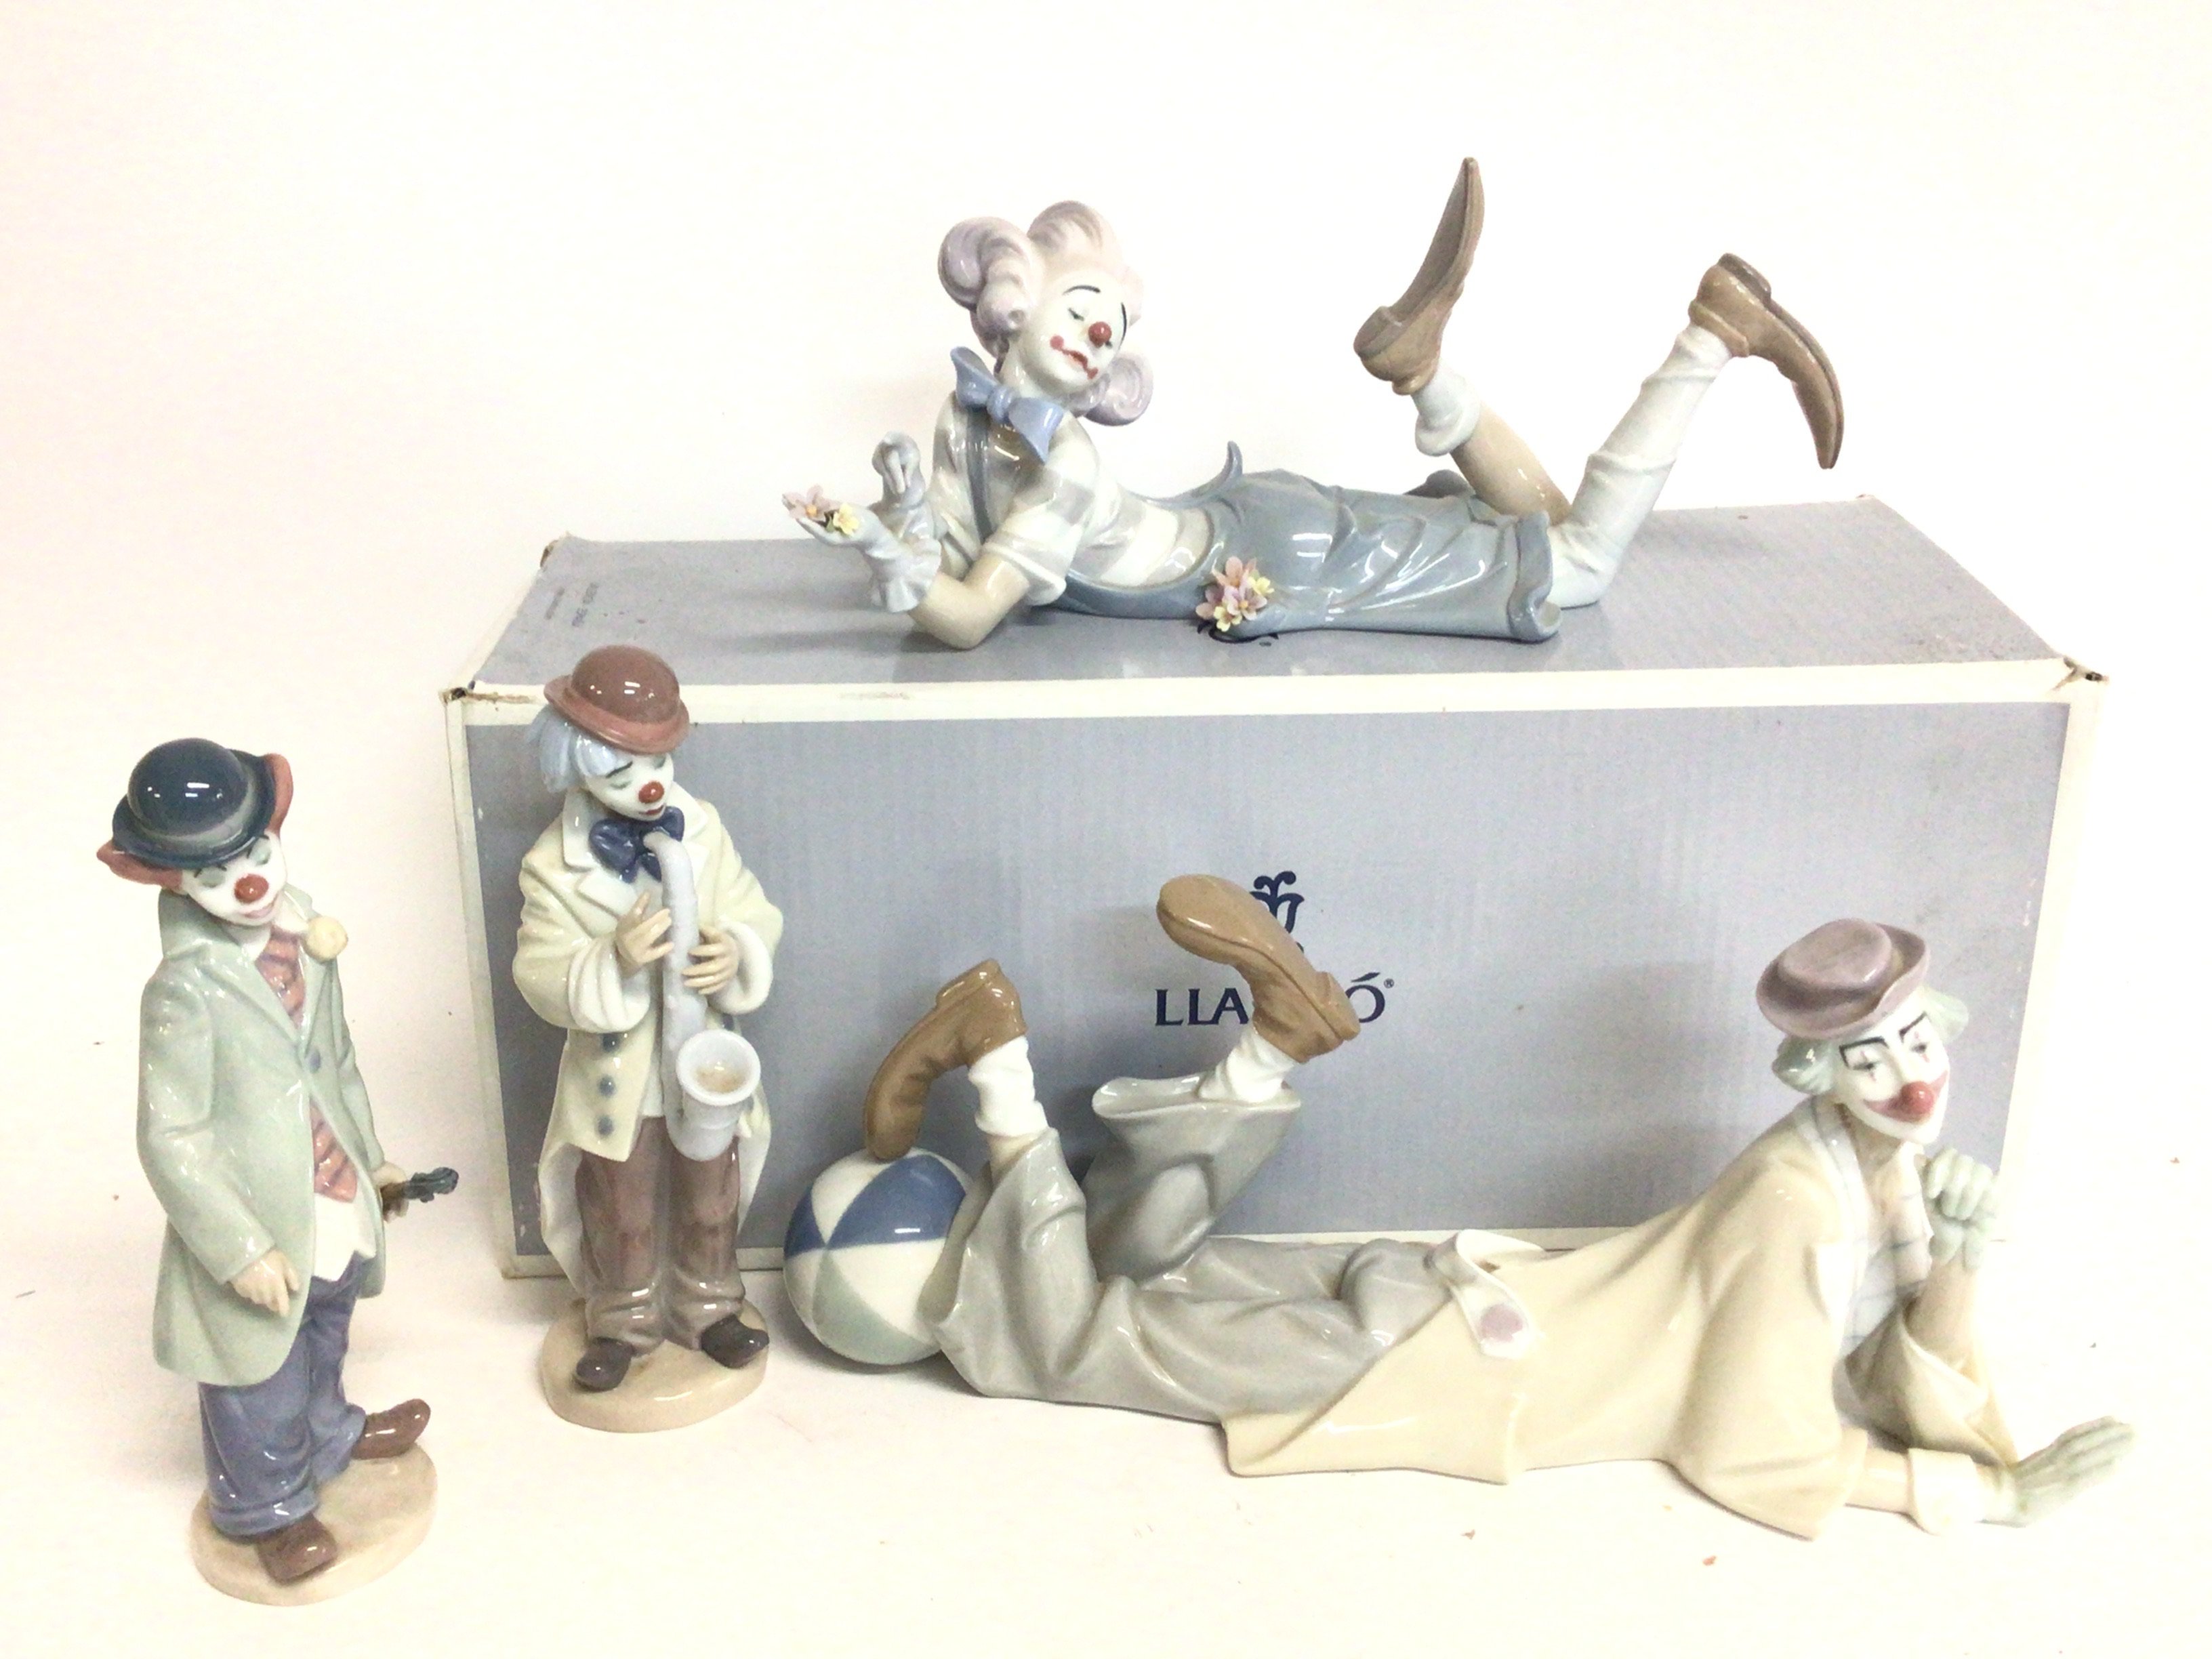 A collection of porcelain Lladro clown figures, no